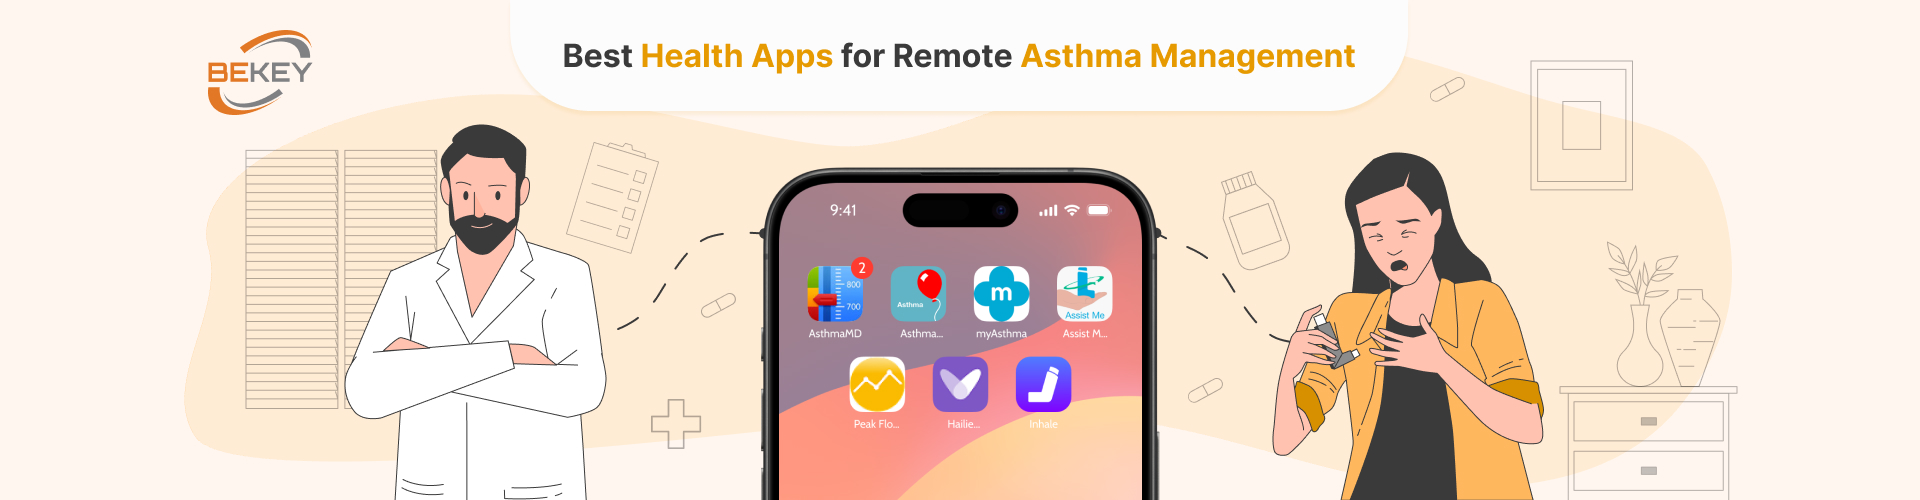 Best Health Apps for Remote Asthma Management - image